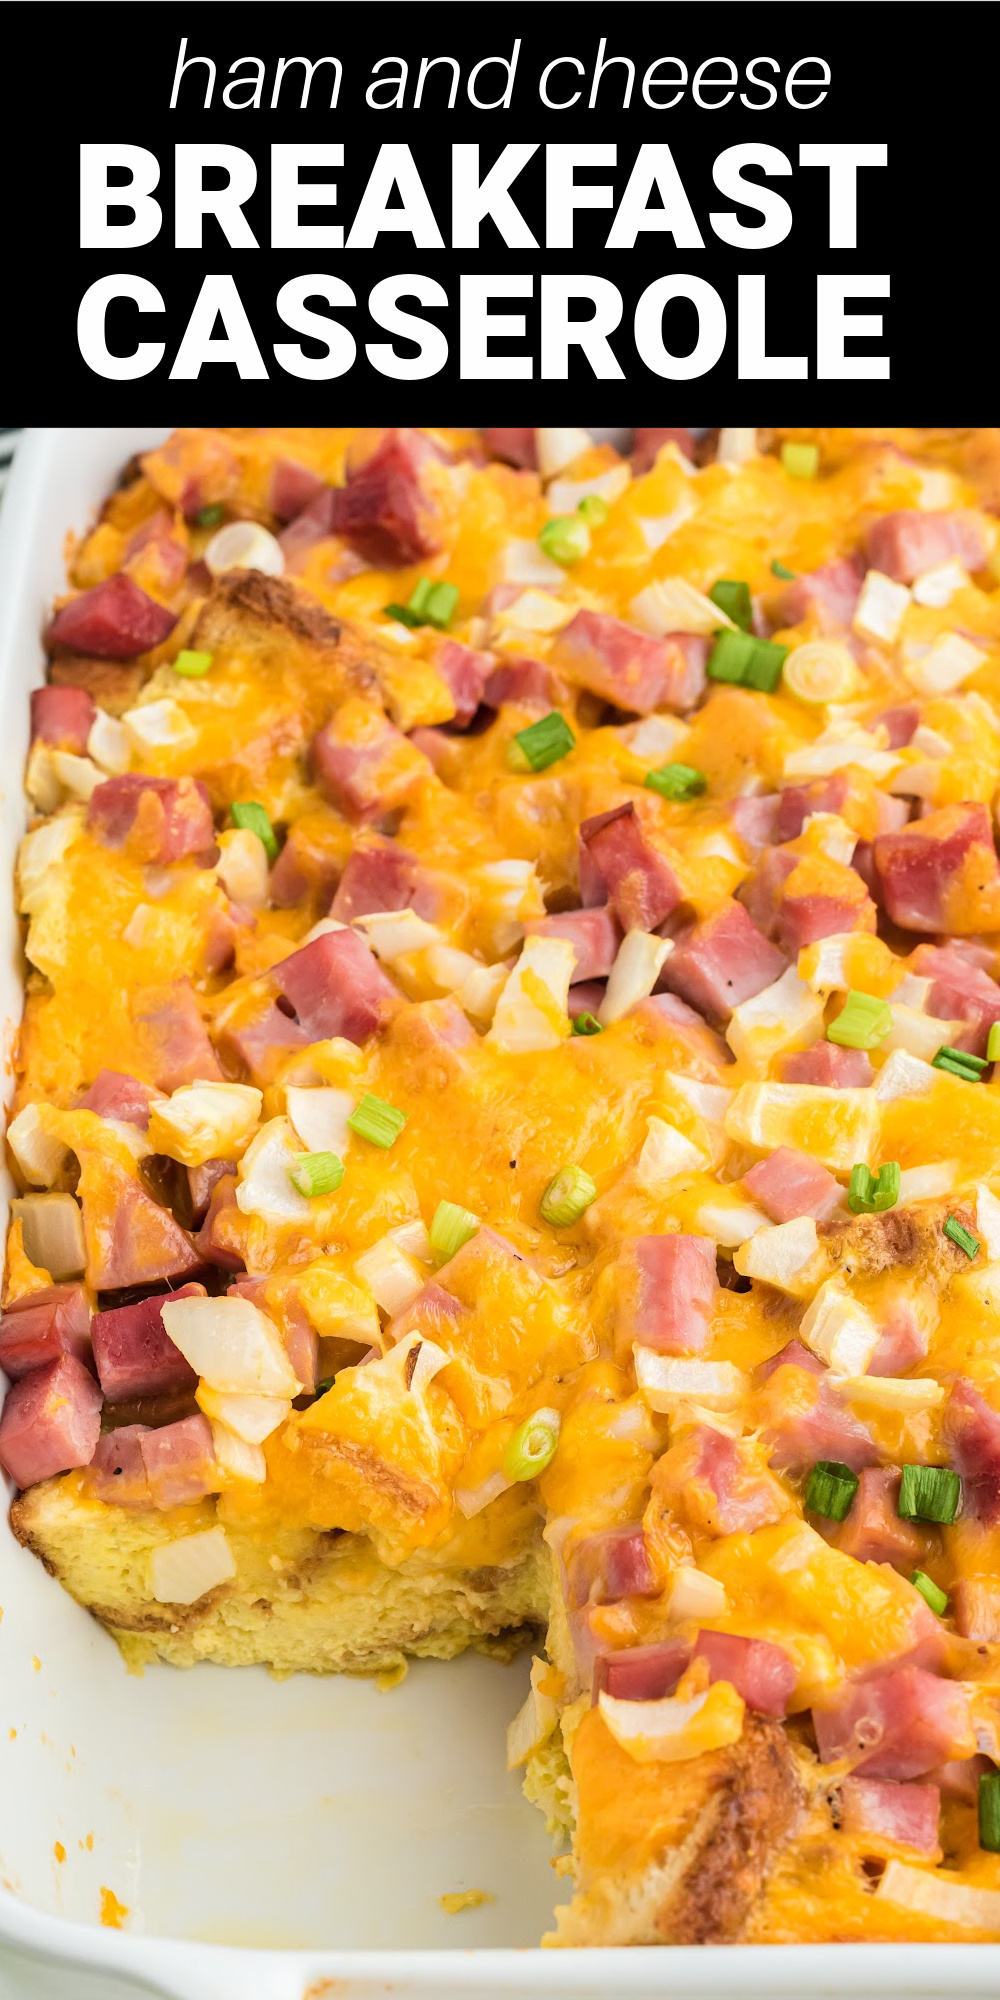 This Ham and Cheese Breakfast Casserole is a comforting flavor-packed breakfast casserole for the entire family to enjoy! Starting with a base of soft white bread, delicious ham and melted cheese are suspended in a creamy egg filling and baked until golden brown.